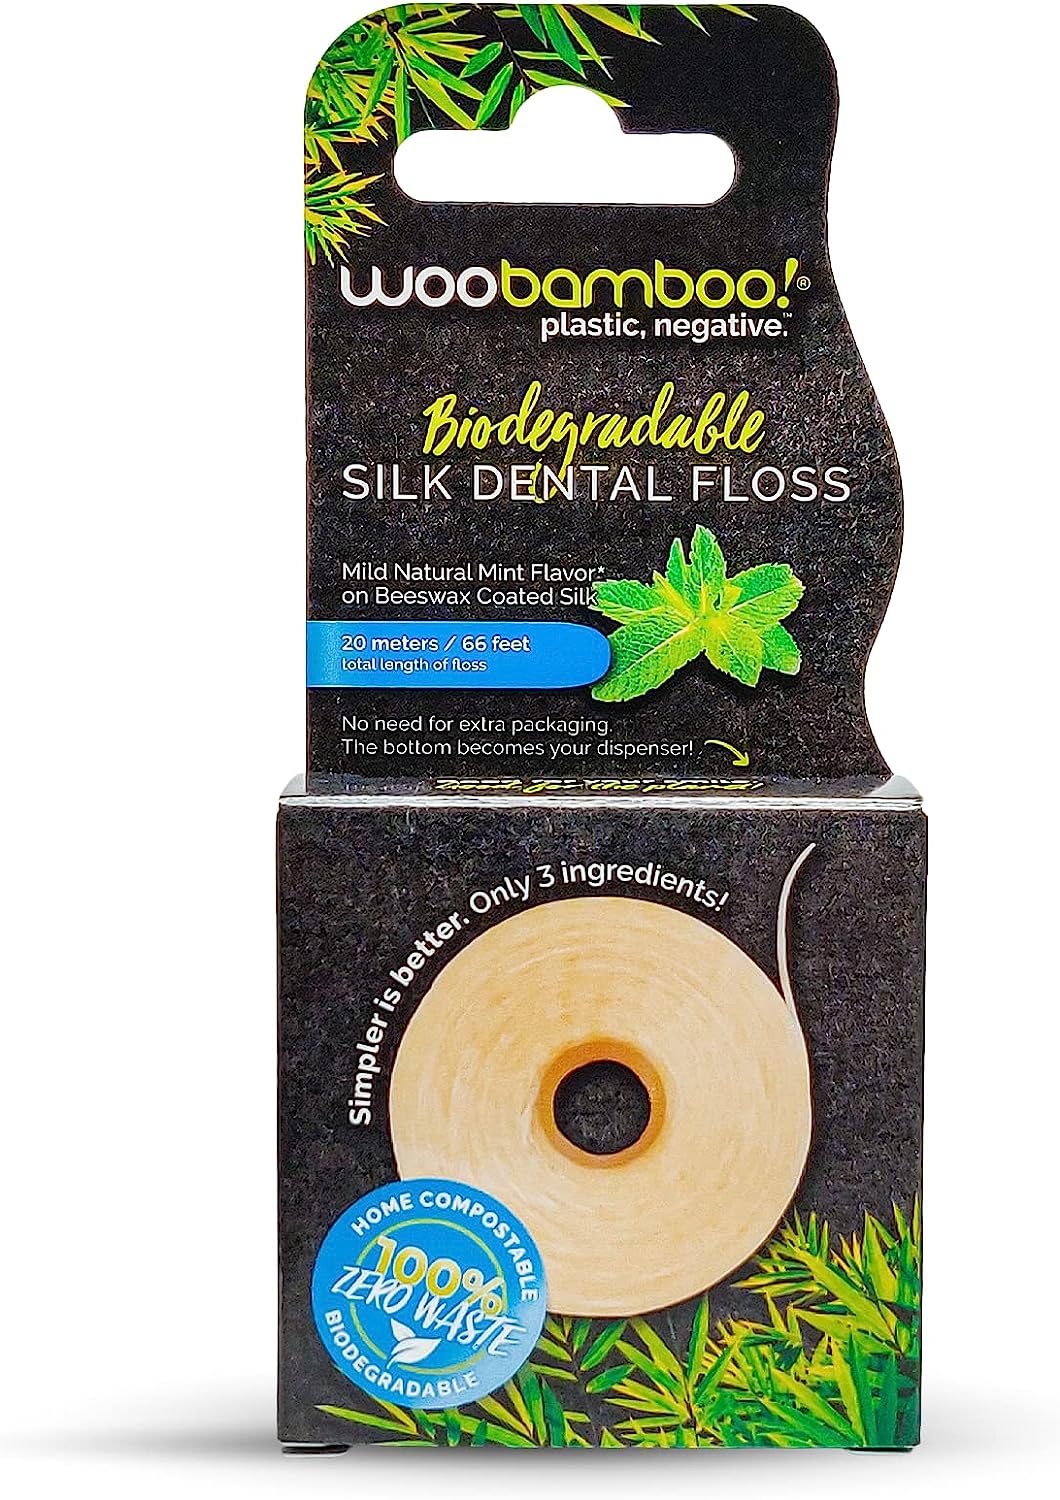 Woobamboo - Floss Silk Mint 20 Meters - Case Of 6-ct